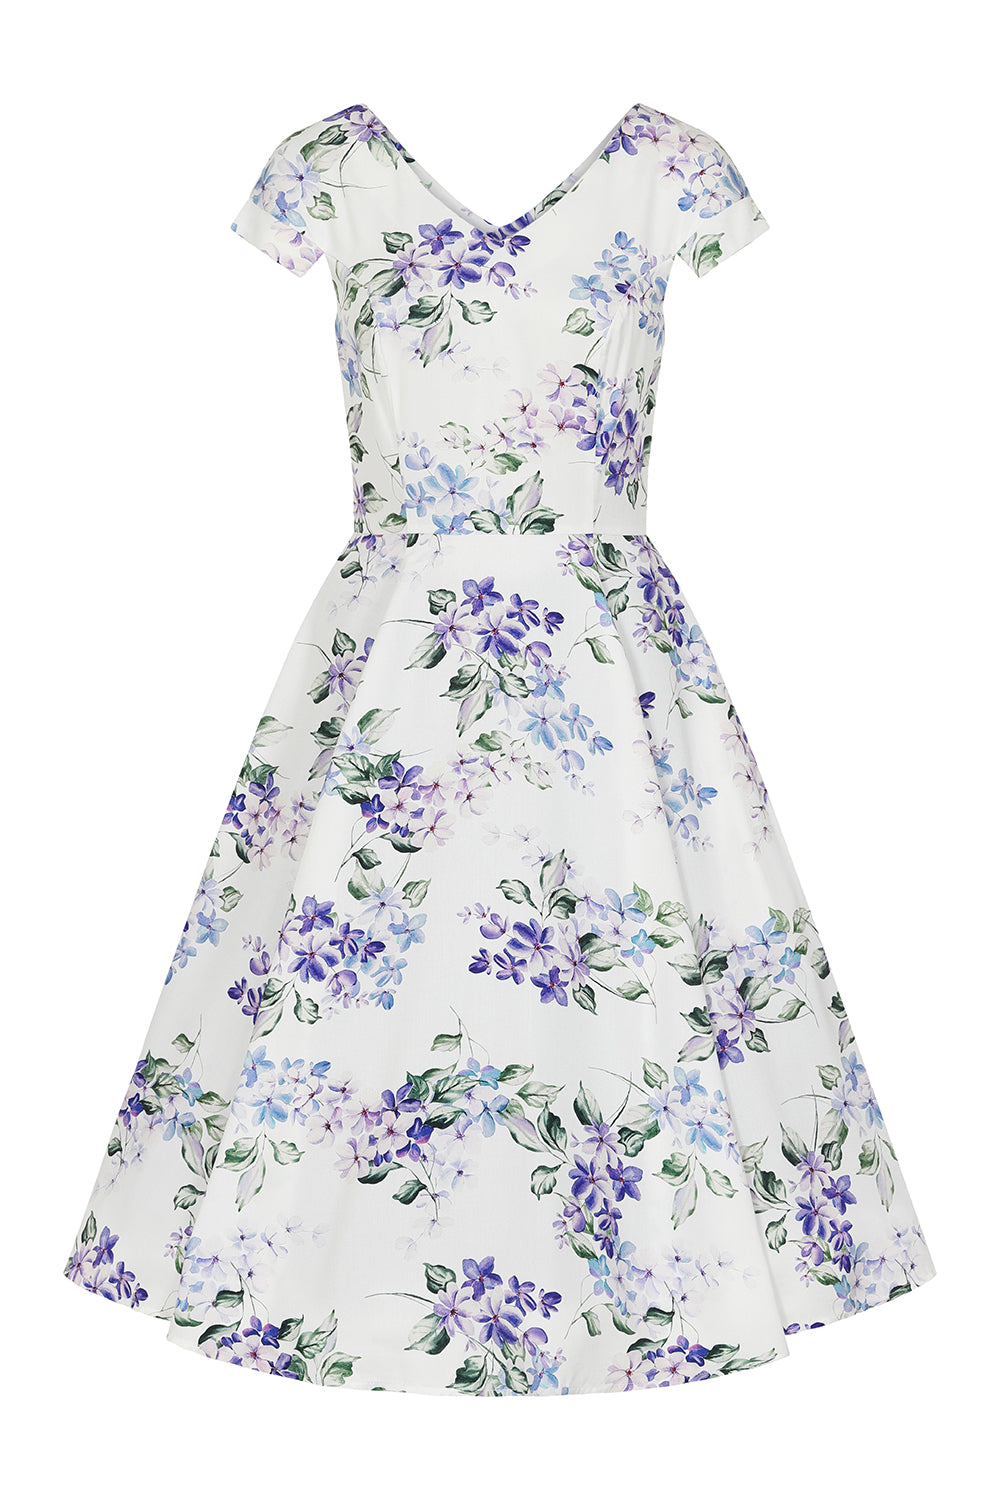 Lucie Floral 50s Swing Dress by Hearts and Roses